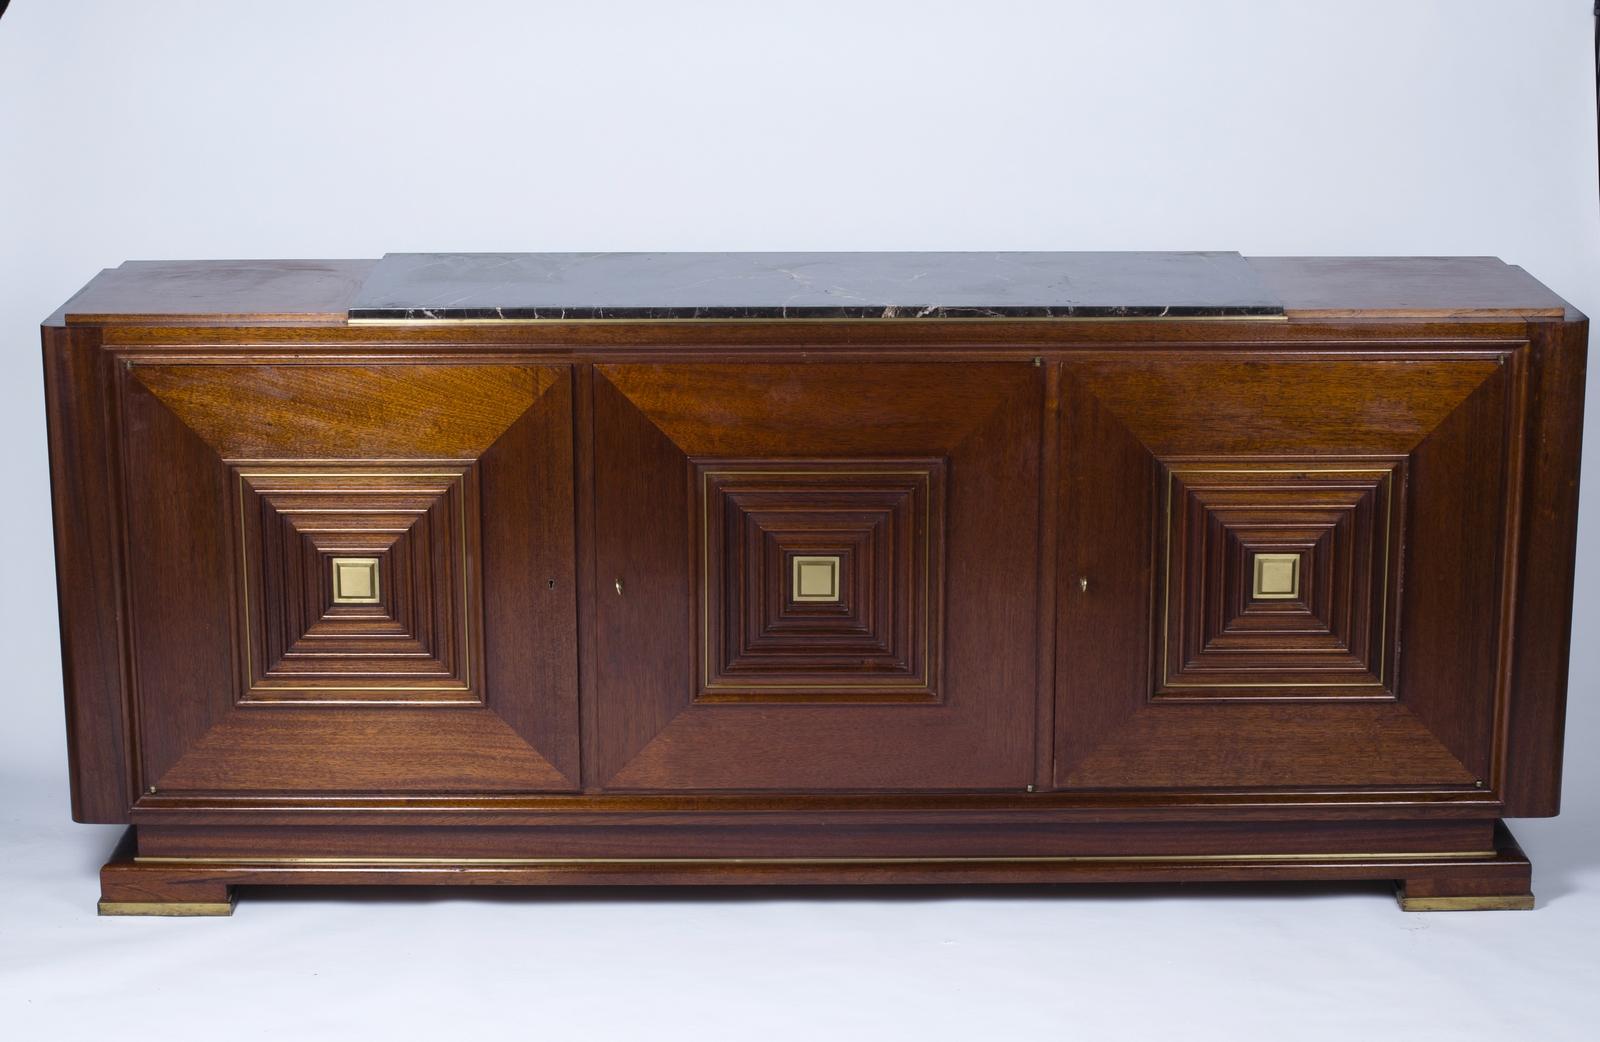 Buffet in solid wood and panels in wood veneer.
Three molded doors with highlights in gilded bronze.
Recessed base with four heels of angles in gilded bronze.
Top partially covered with veined black marble, highlighted with a bronze rod.
 